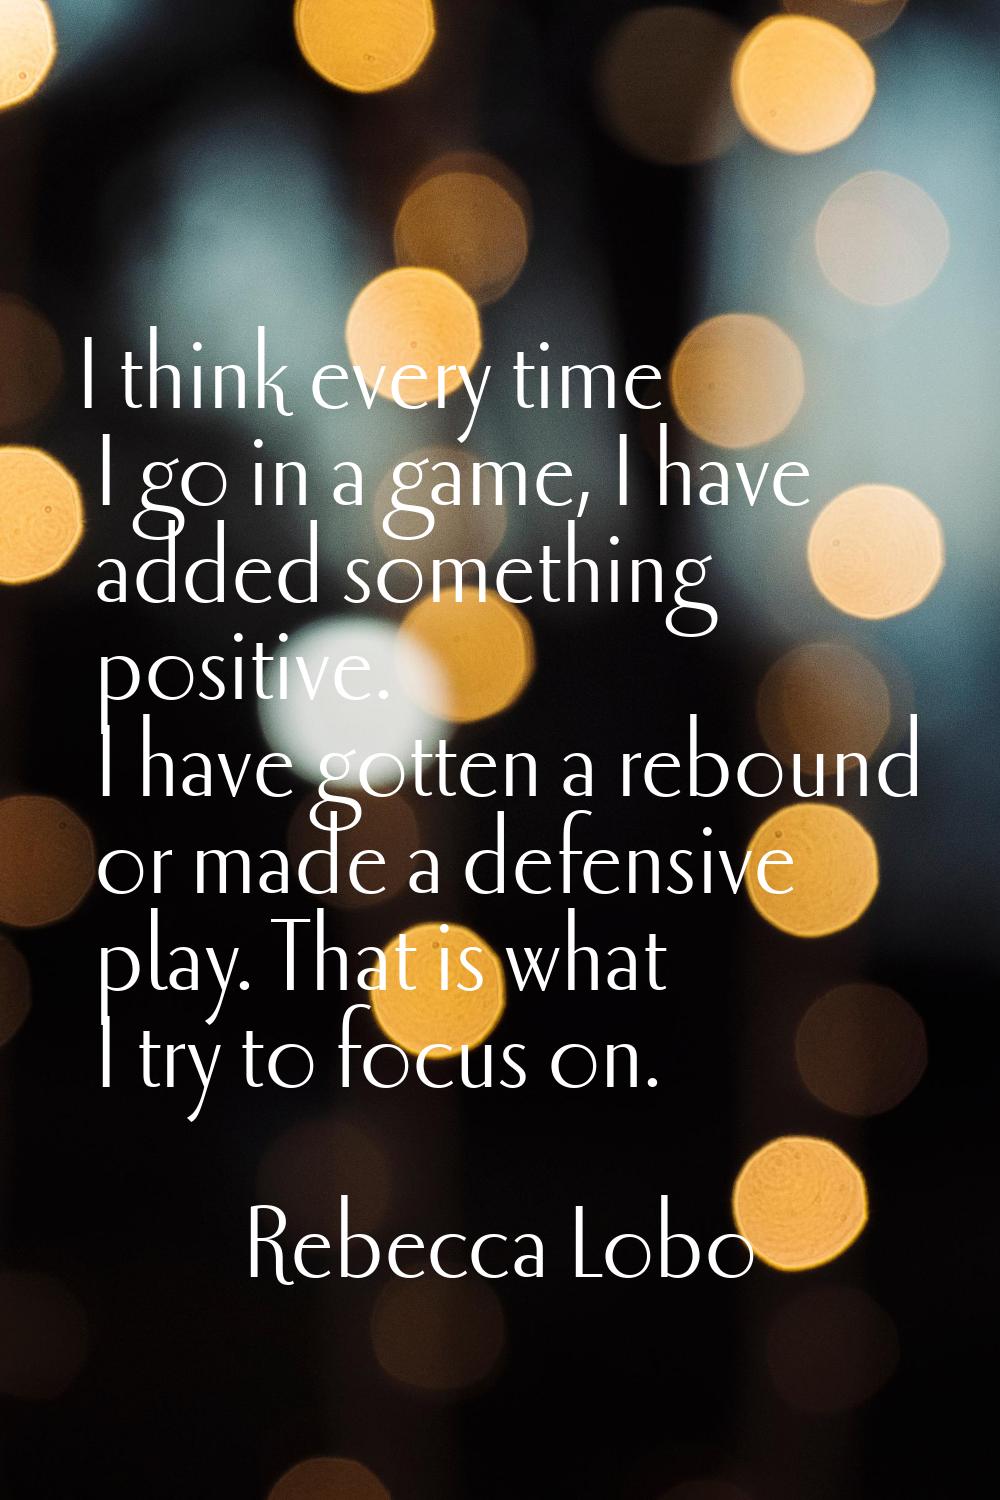 I think every time I go in a game, I have added something positive. I have gotten a rebound or made